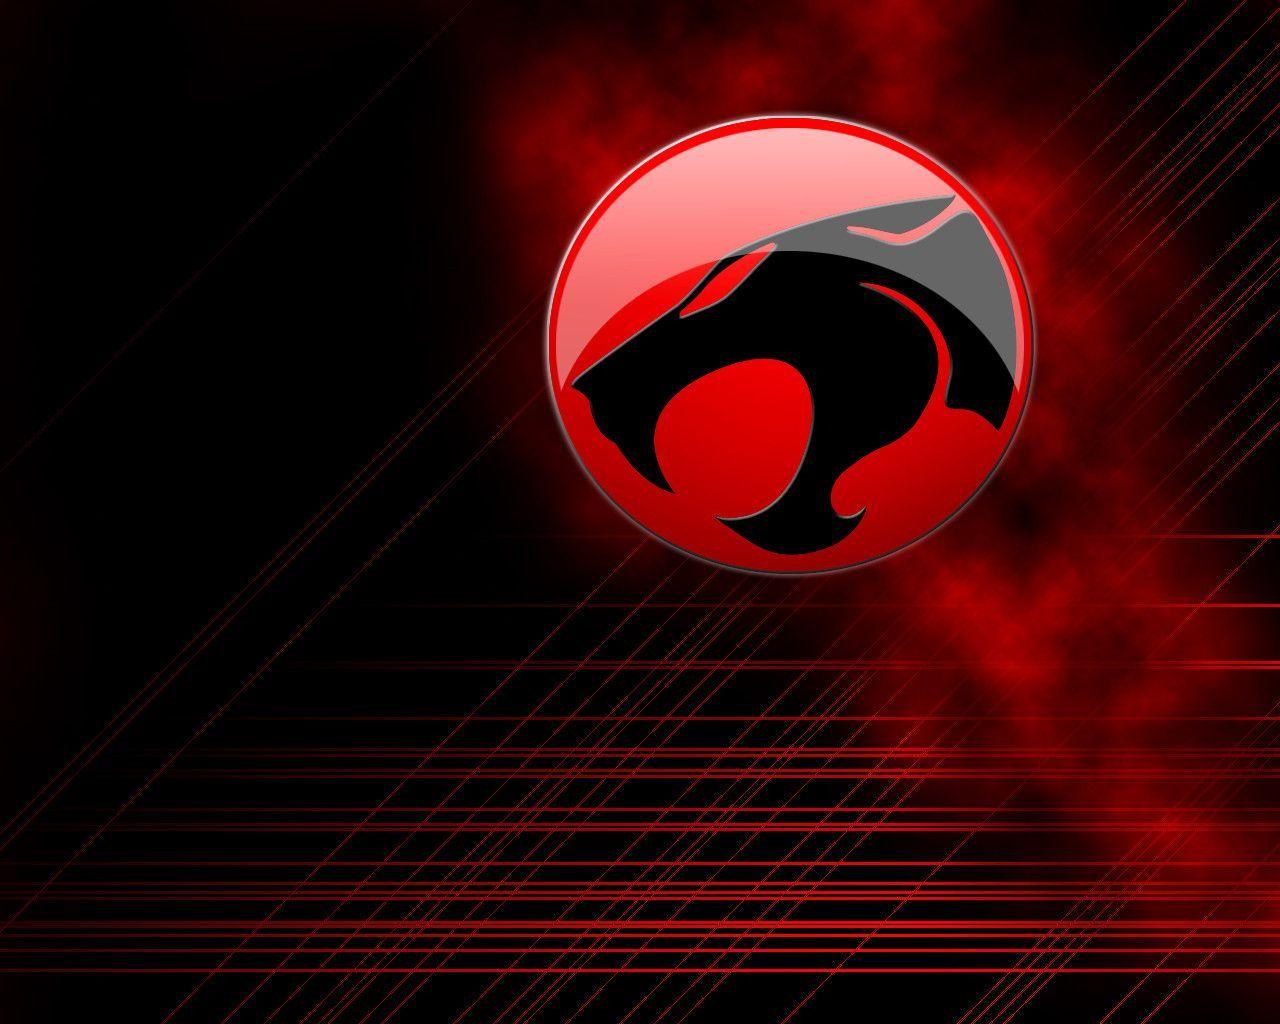 Thundercats Hd Wallpapers Inn Hd Thundercats Symbol Wallpaper Wallpapers  For Mobile Android Windows Mac Iphone Nature  फट शयर